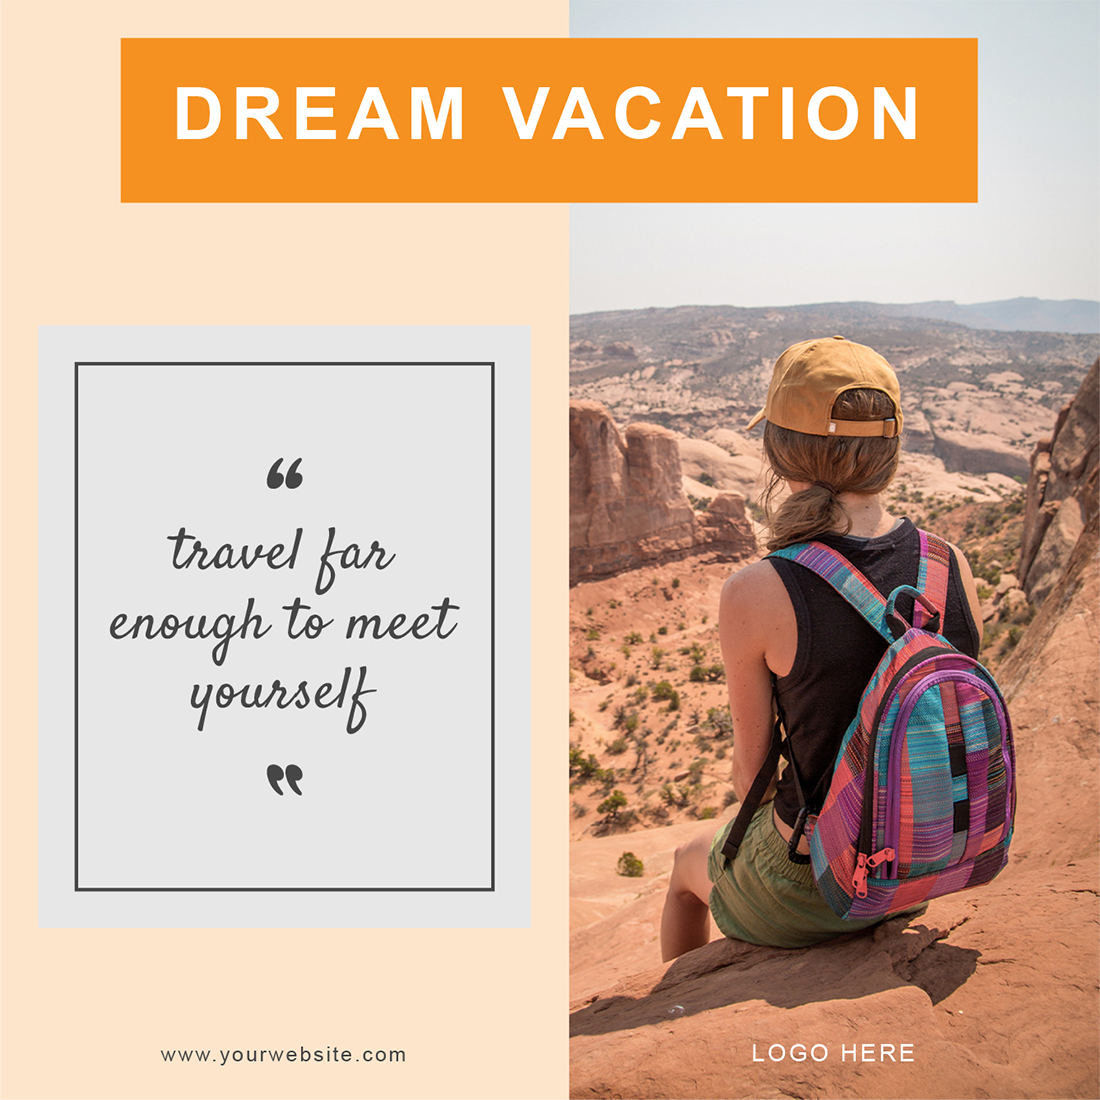 Travelling Theme Social Media Post Templates dream vacation preview.